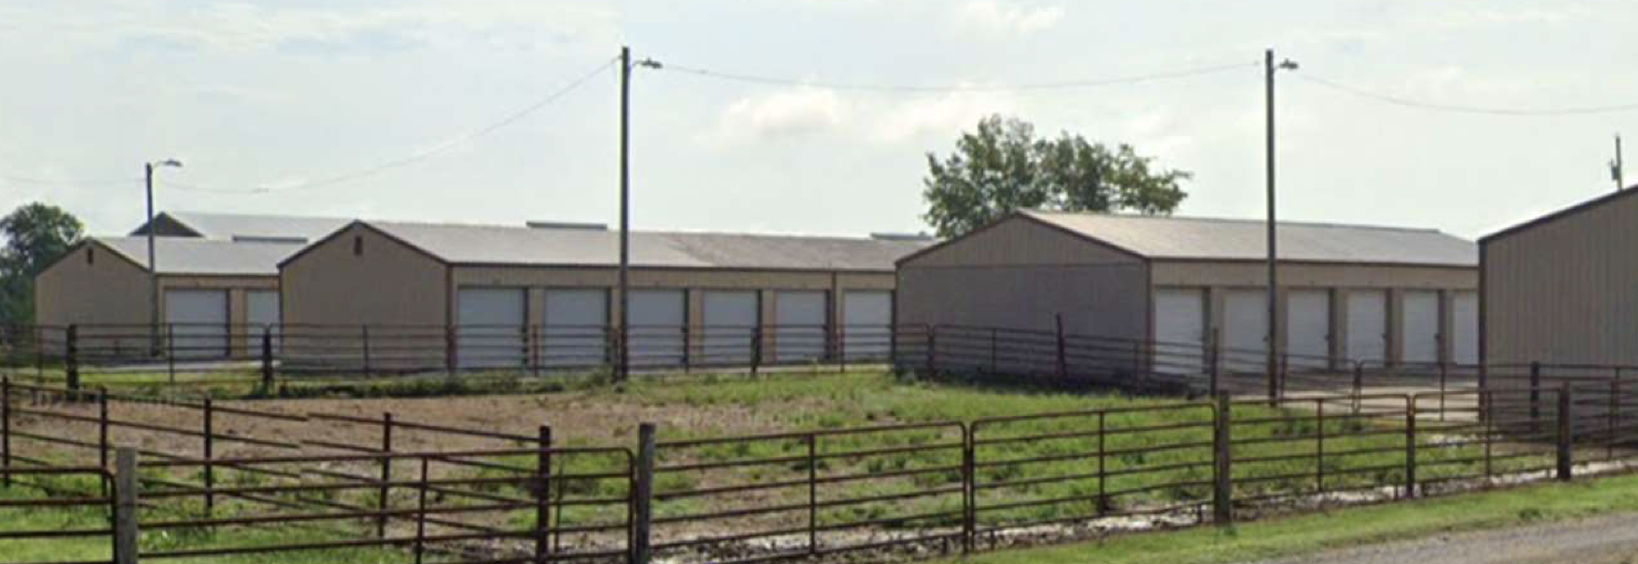 fenced and gated self storage Perryville, MO 63775